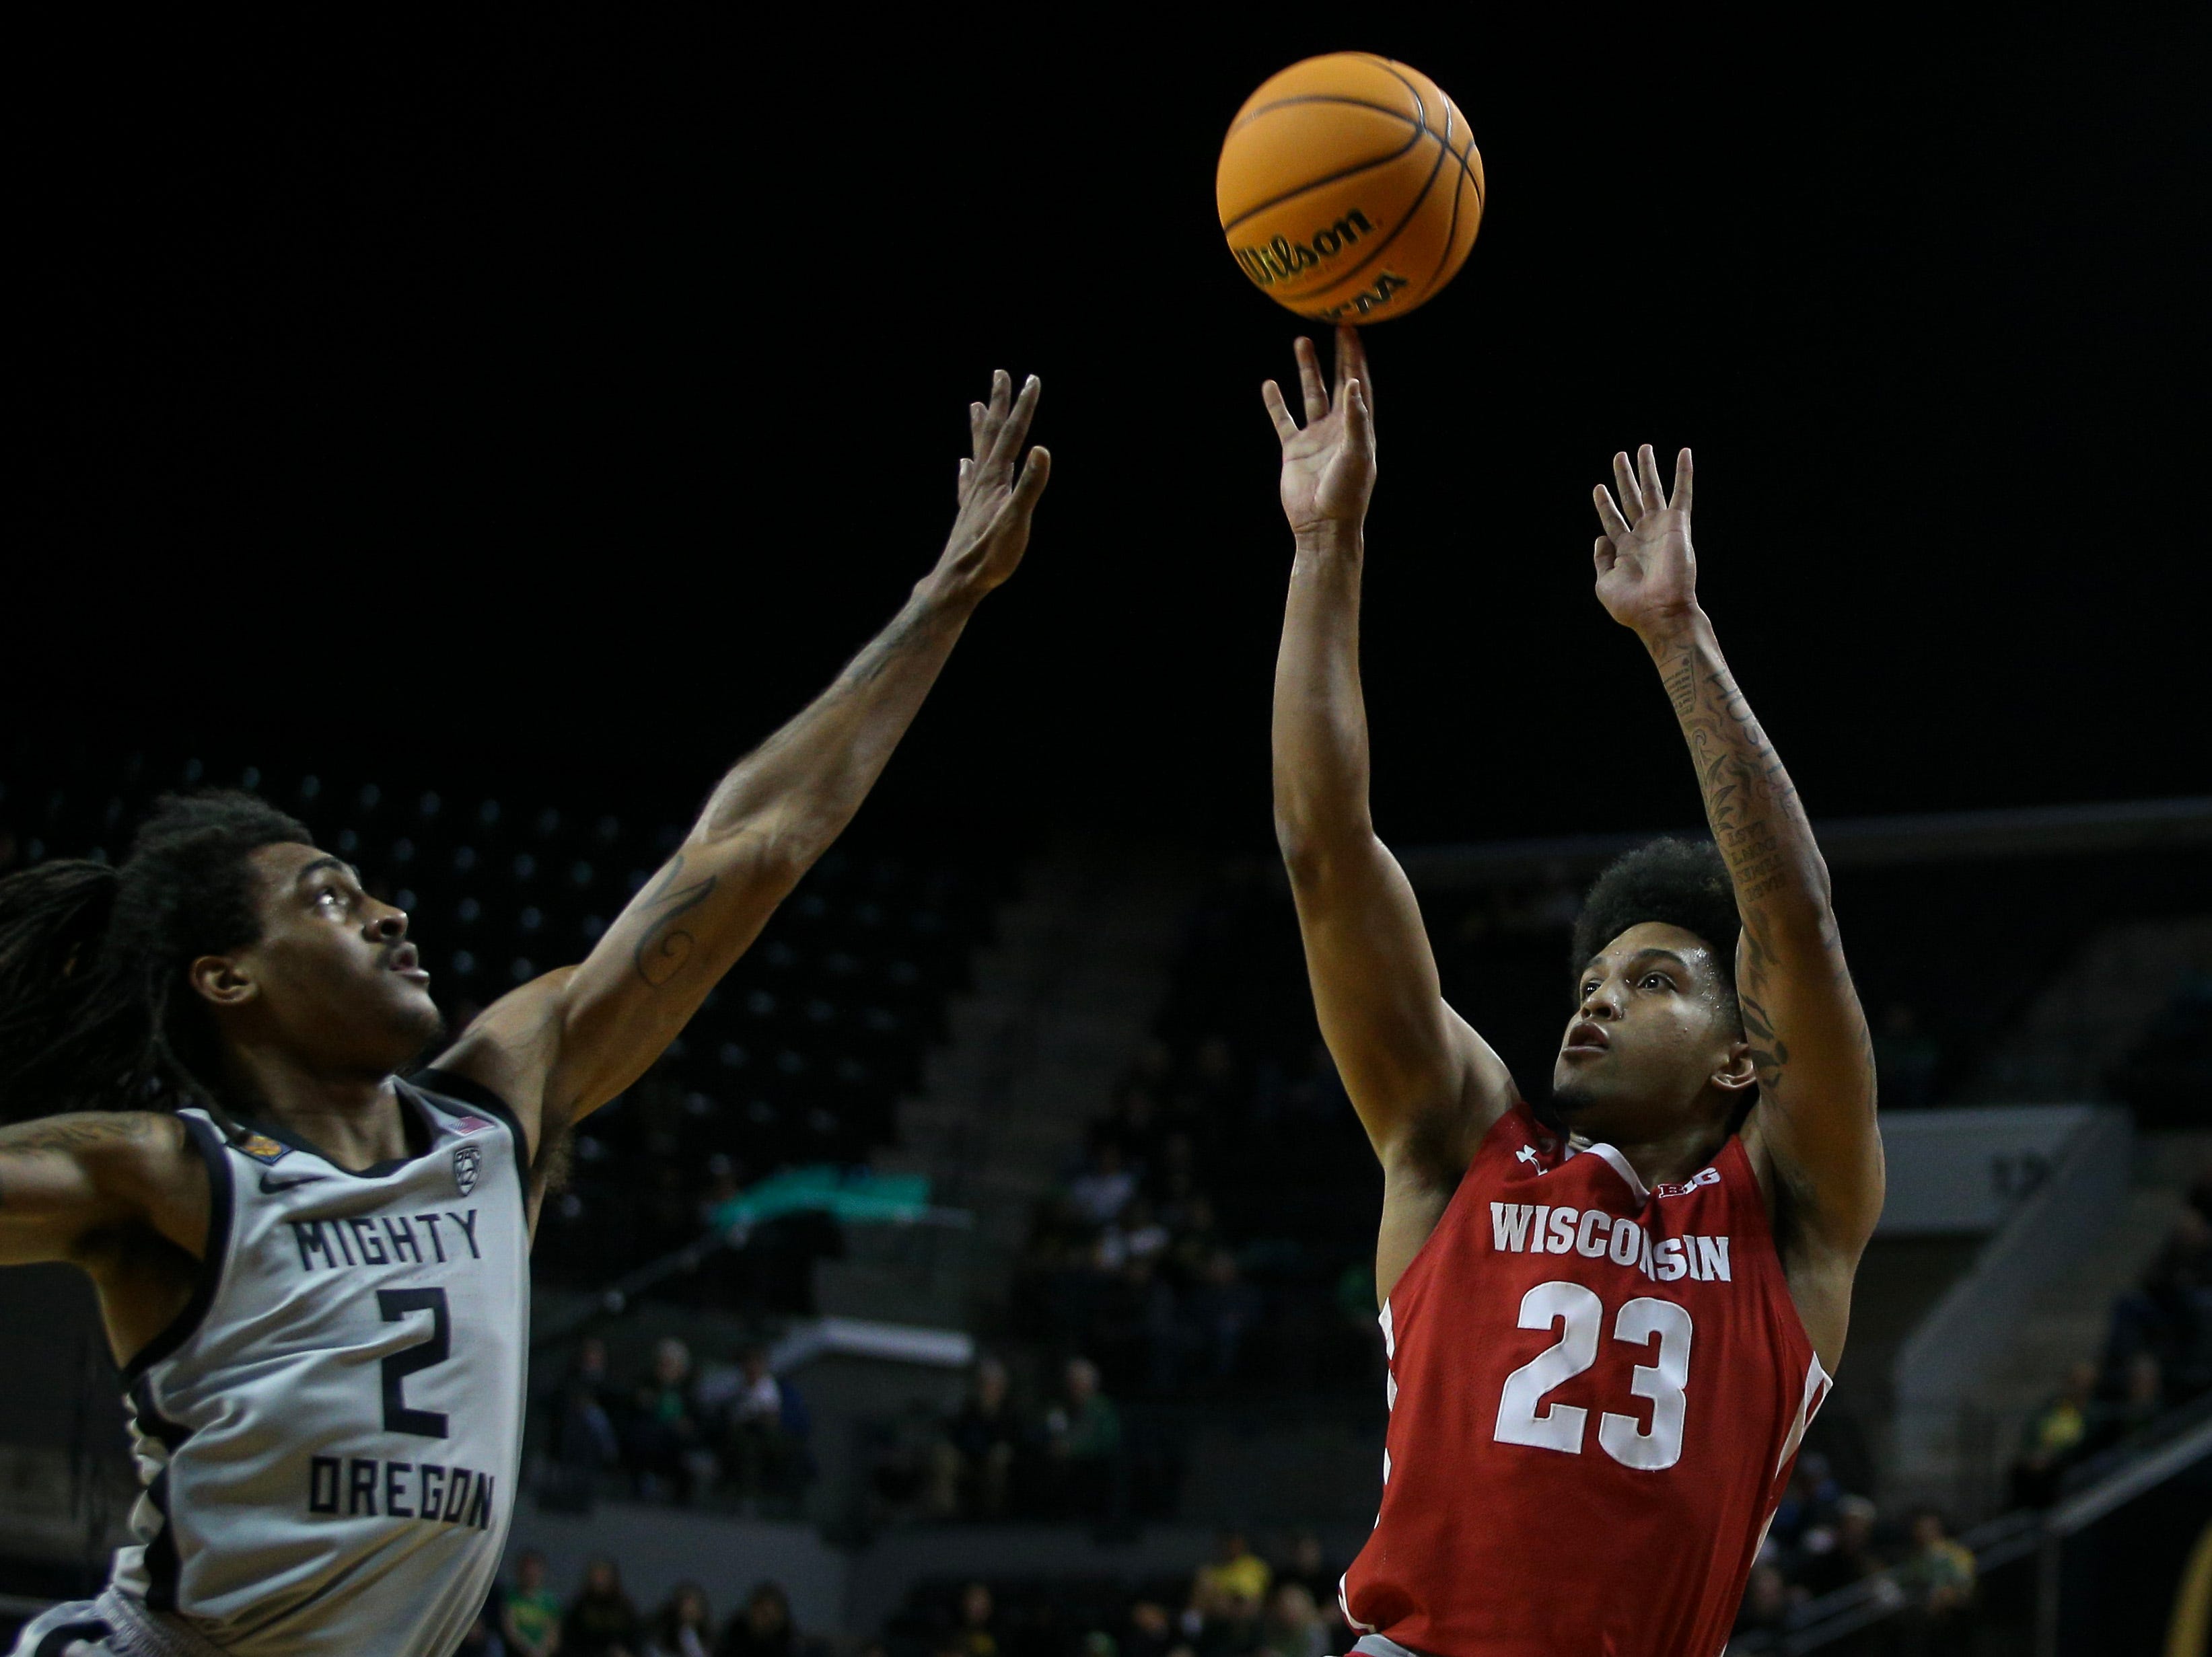 Wisconsin guard Chucky Hepburn puts up a shot under coverage from Oregon guard Tyrone Williams as the Oregon Ducks host Wisconsin in the quarterfinal round of the NIT Tuesday, March 21, 2023 at Matthew Knight Arena in Eugene, Ore. Ncaa Basketball Wisconsin At Oregon Mbb Nit Wisconsin At Oregon